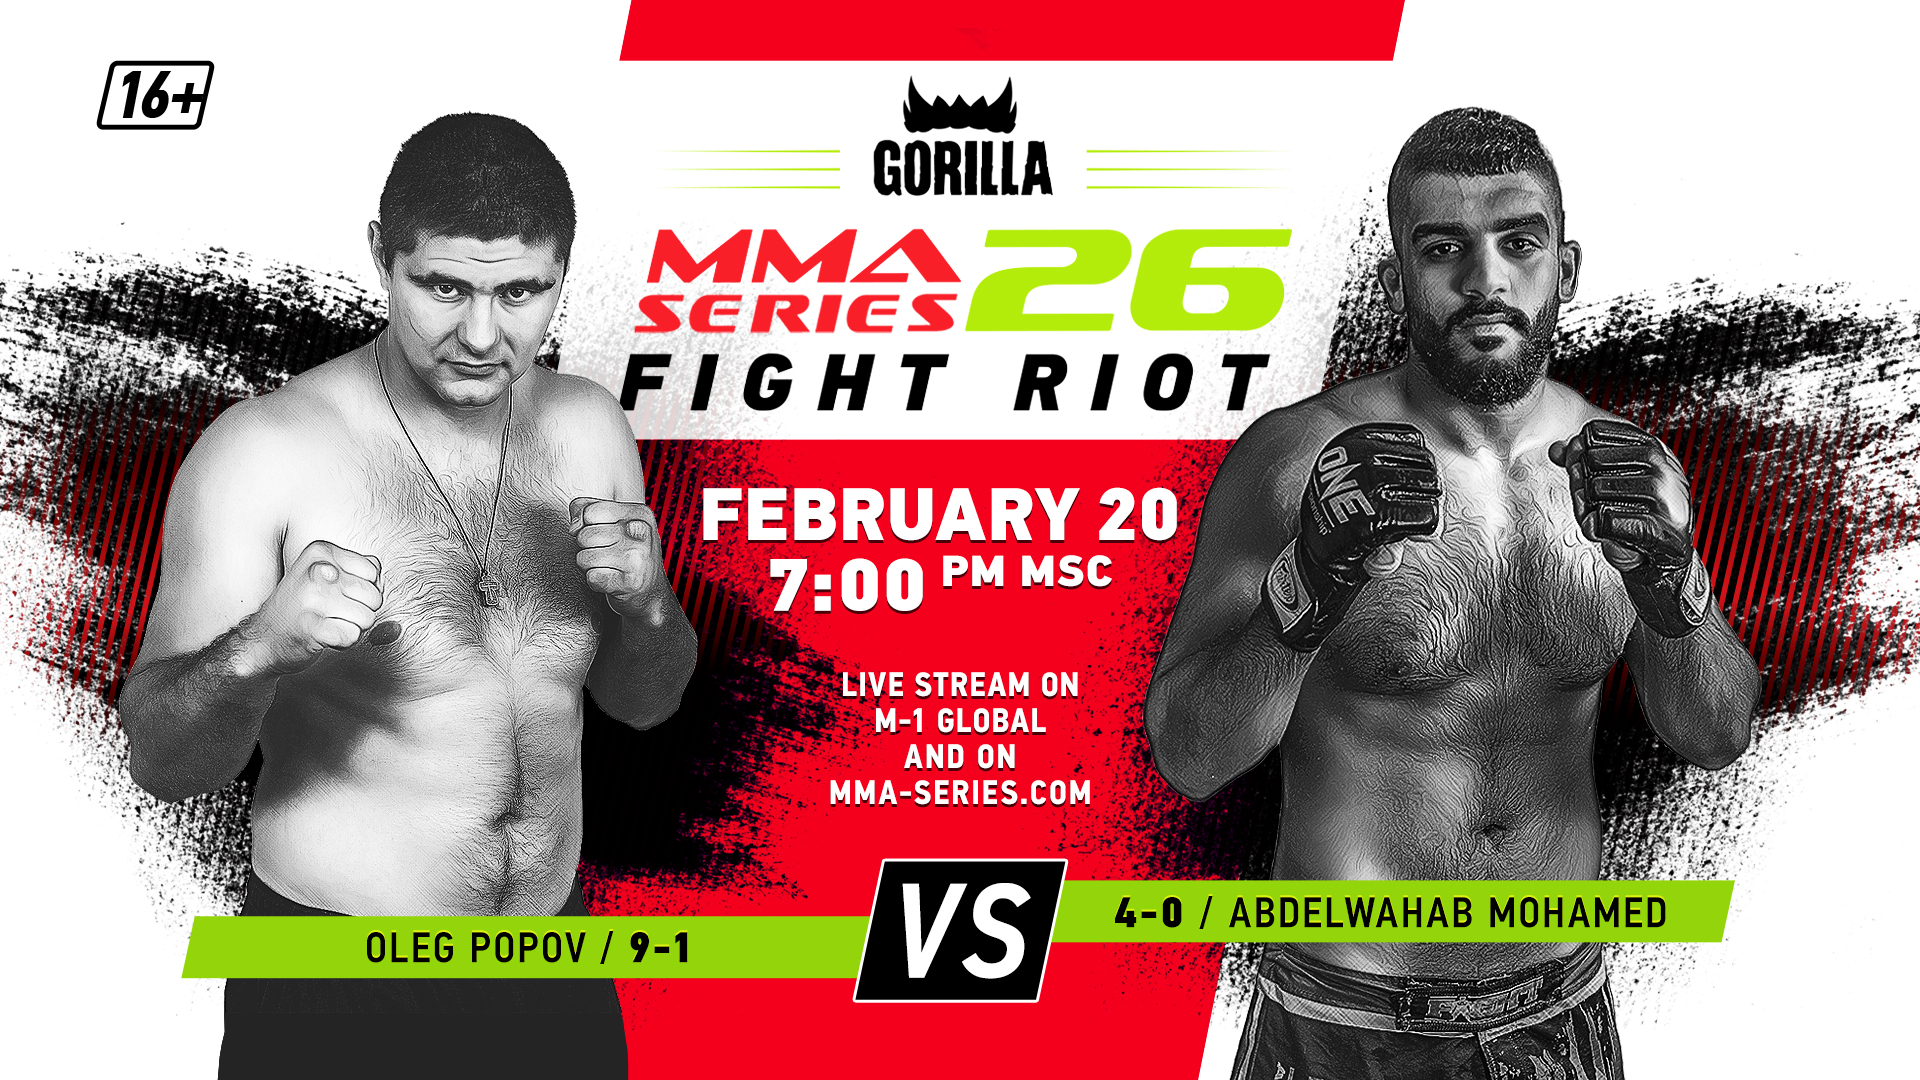 GORILLA MMA SERIES CONTINUES TO EXPAND ITS GEOGRAPHY 26th EVENT WILL BE HELD IN VORONEZH MMA Series official website